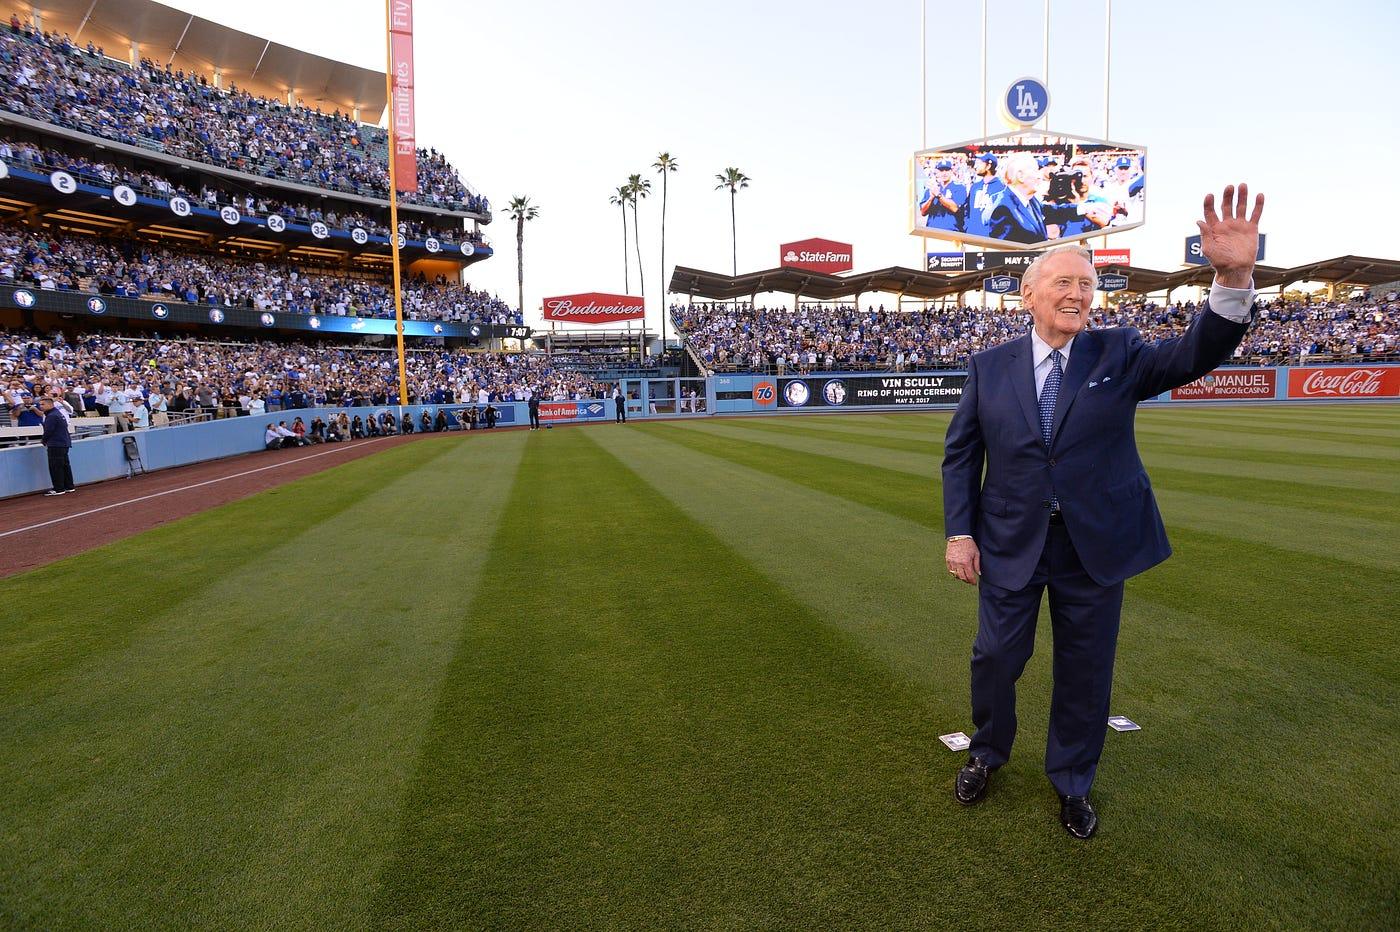 Hank Aaron's historic 715th home run! Watch and listen with the legendary  Vin Scully on the call 